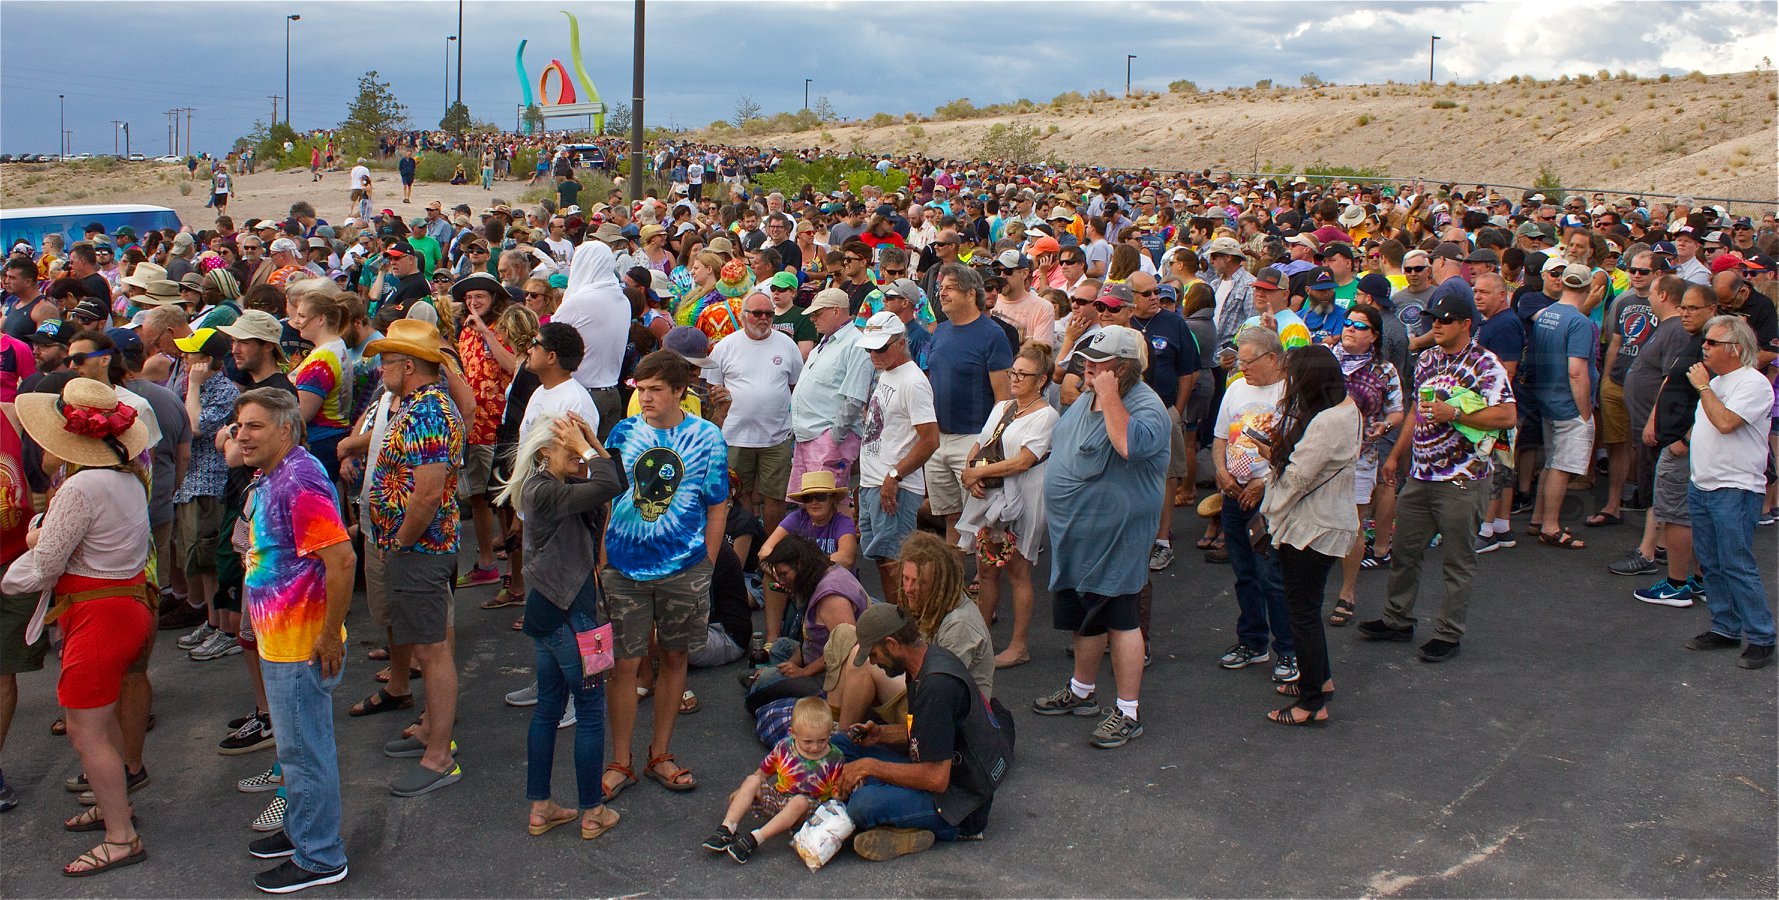 patietly waiting to get in | Isleta Amphitheater